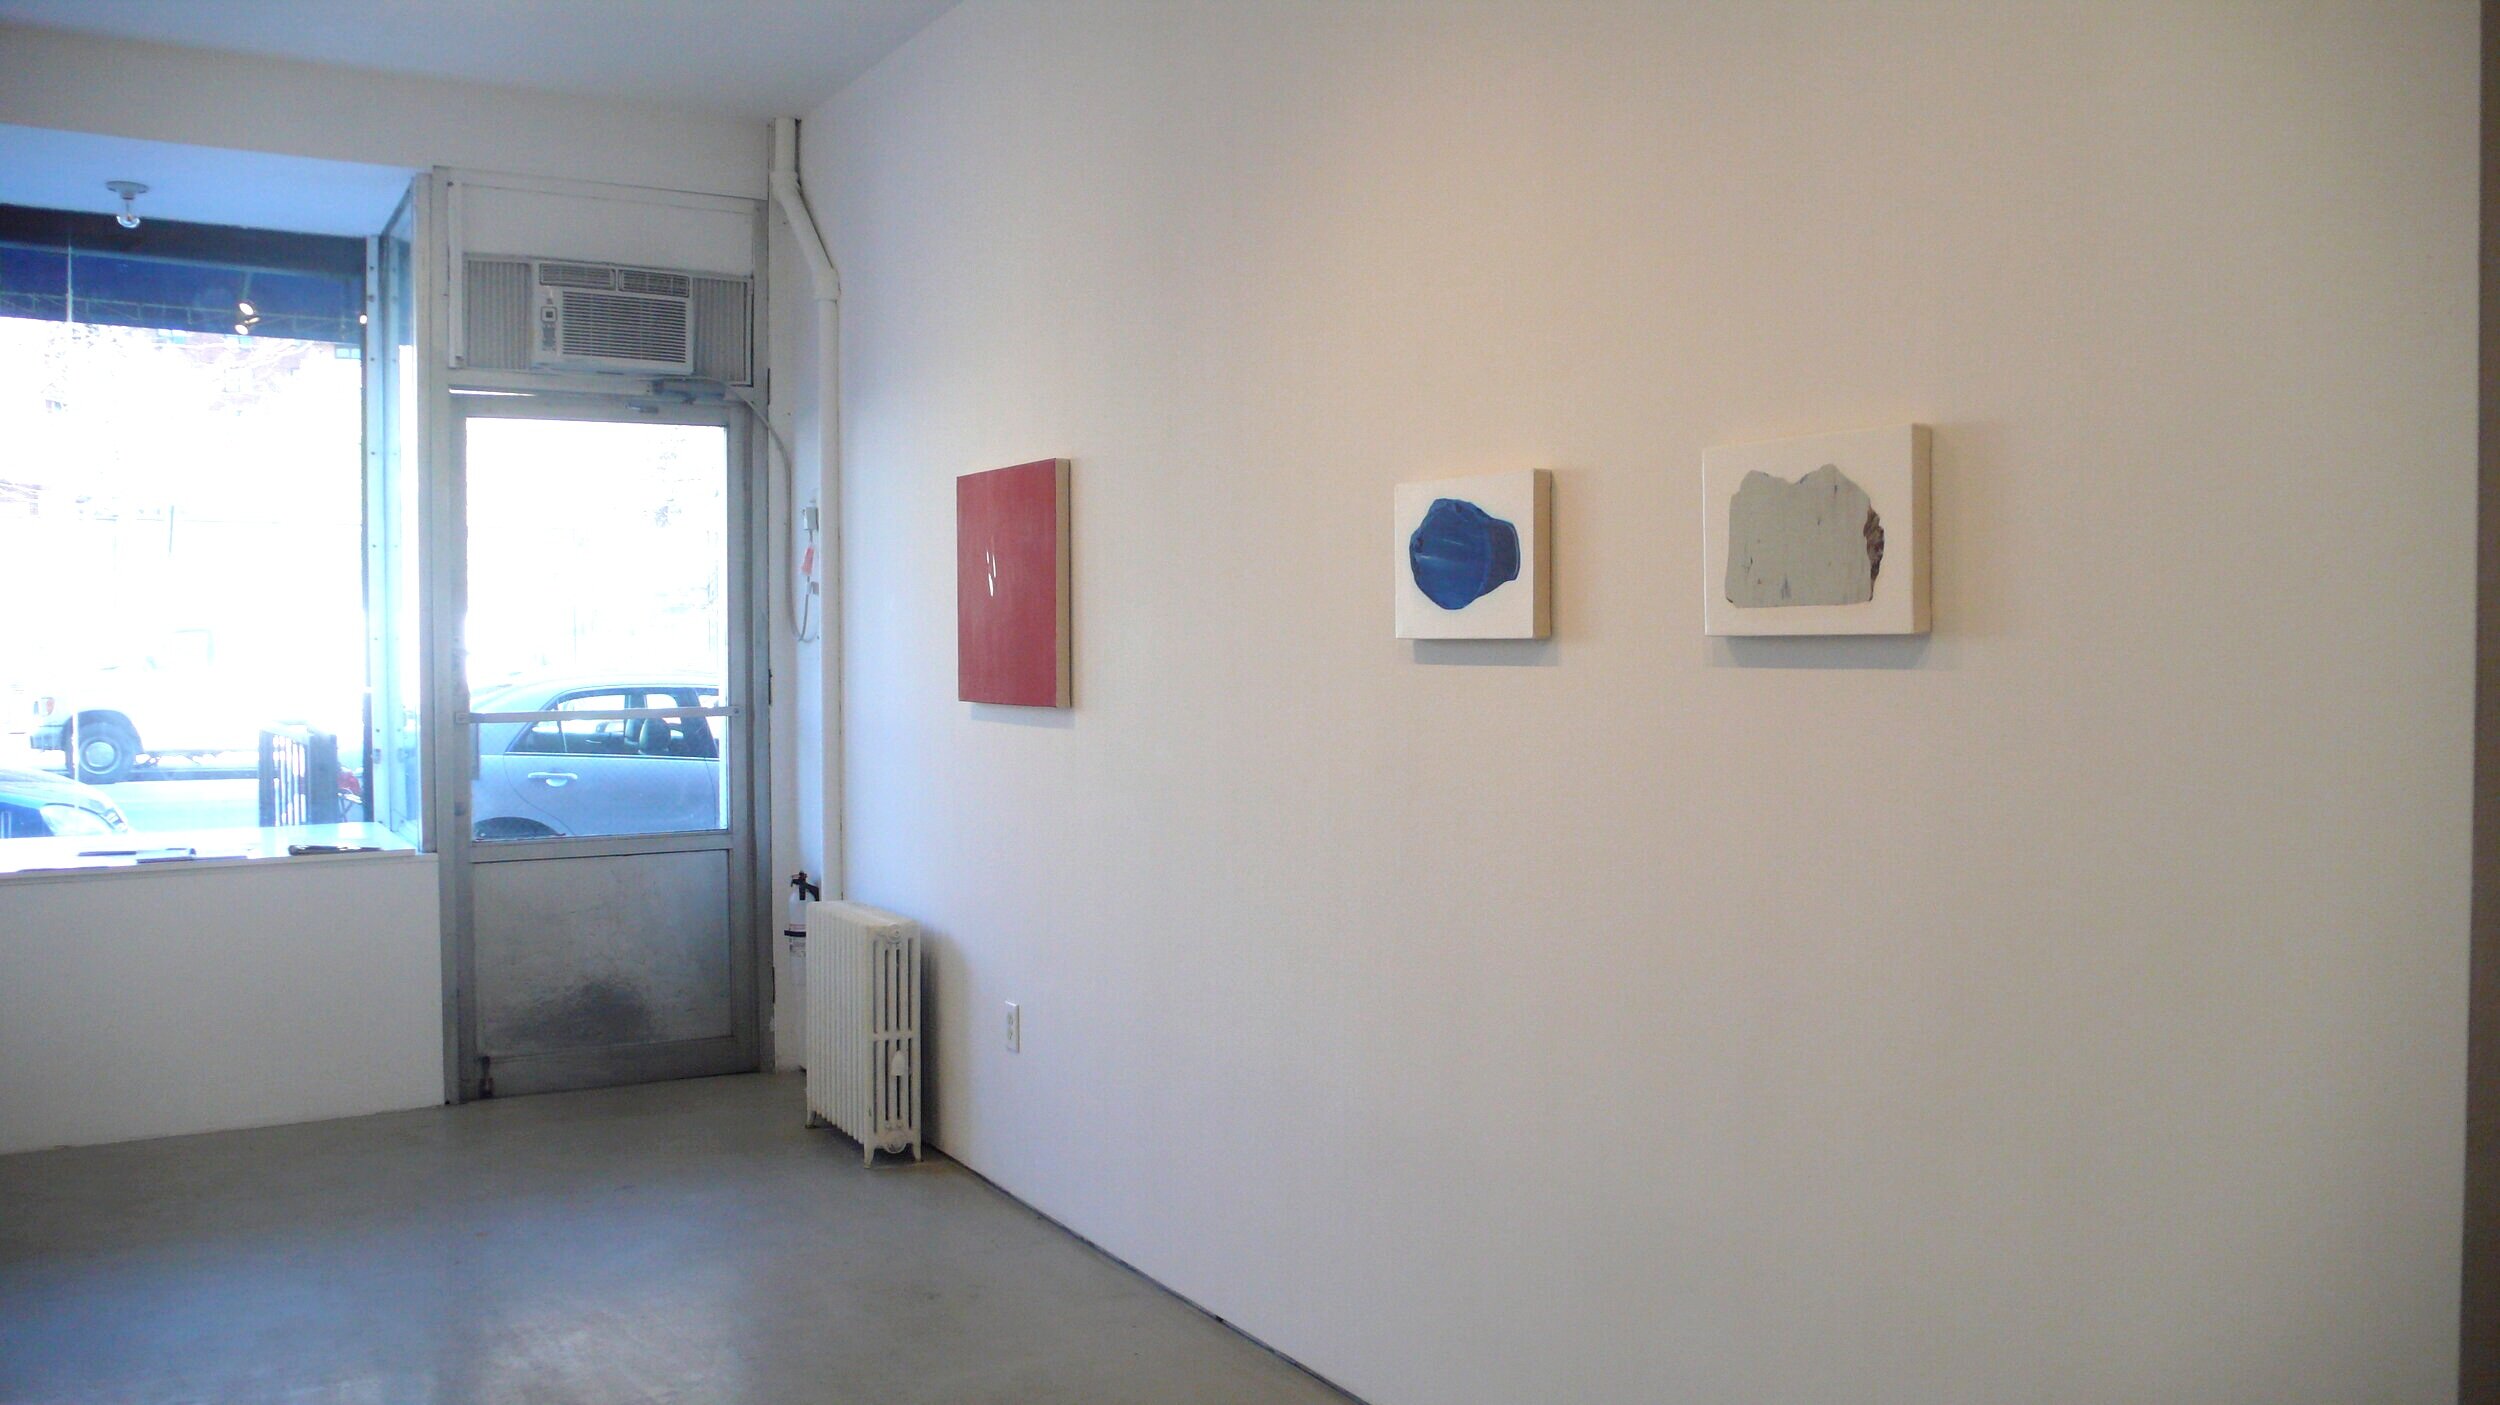 Installation image from the 2009 Miyeon Lee exhibition, CONCRETE UNIVERSE, at Cindy Rucker Gallery, Number 35